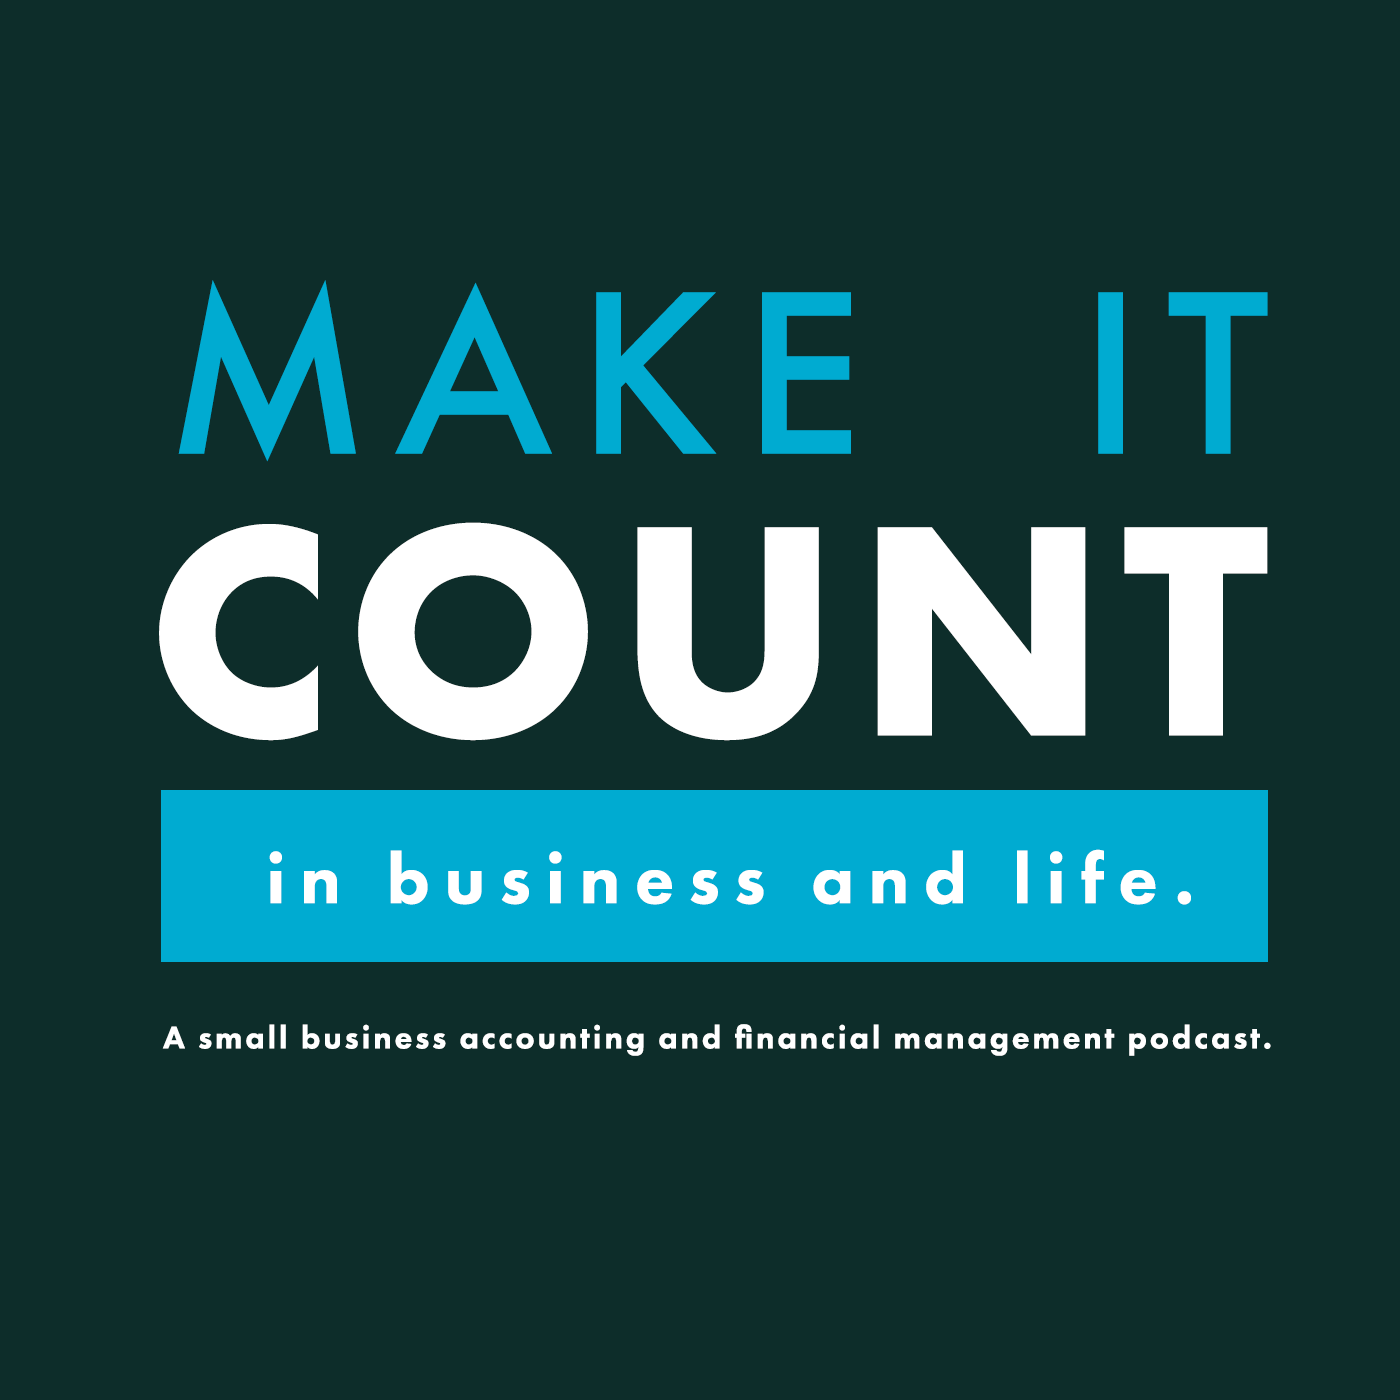 Podcast logo:  Make it count in business and life.